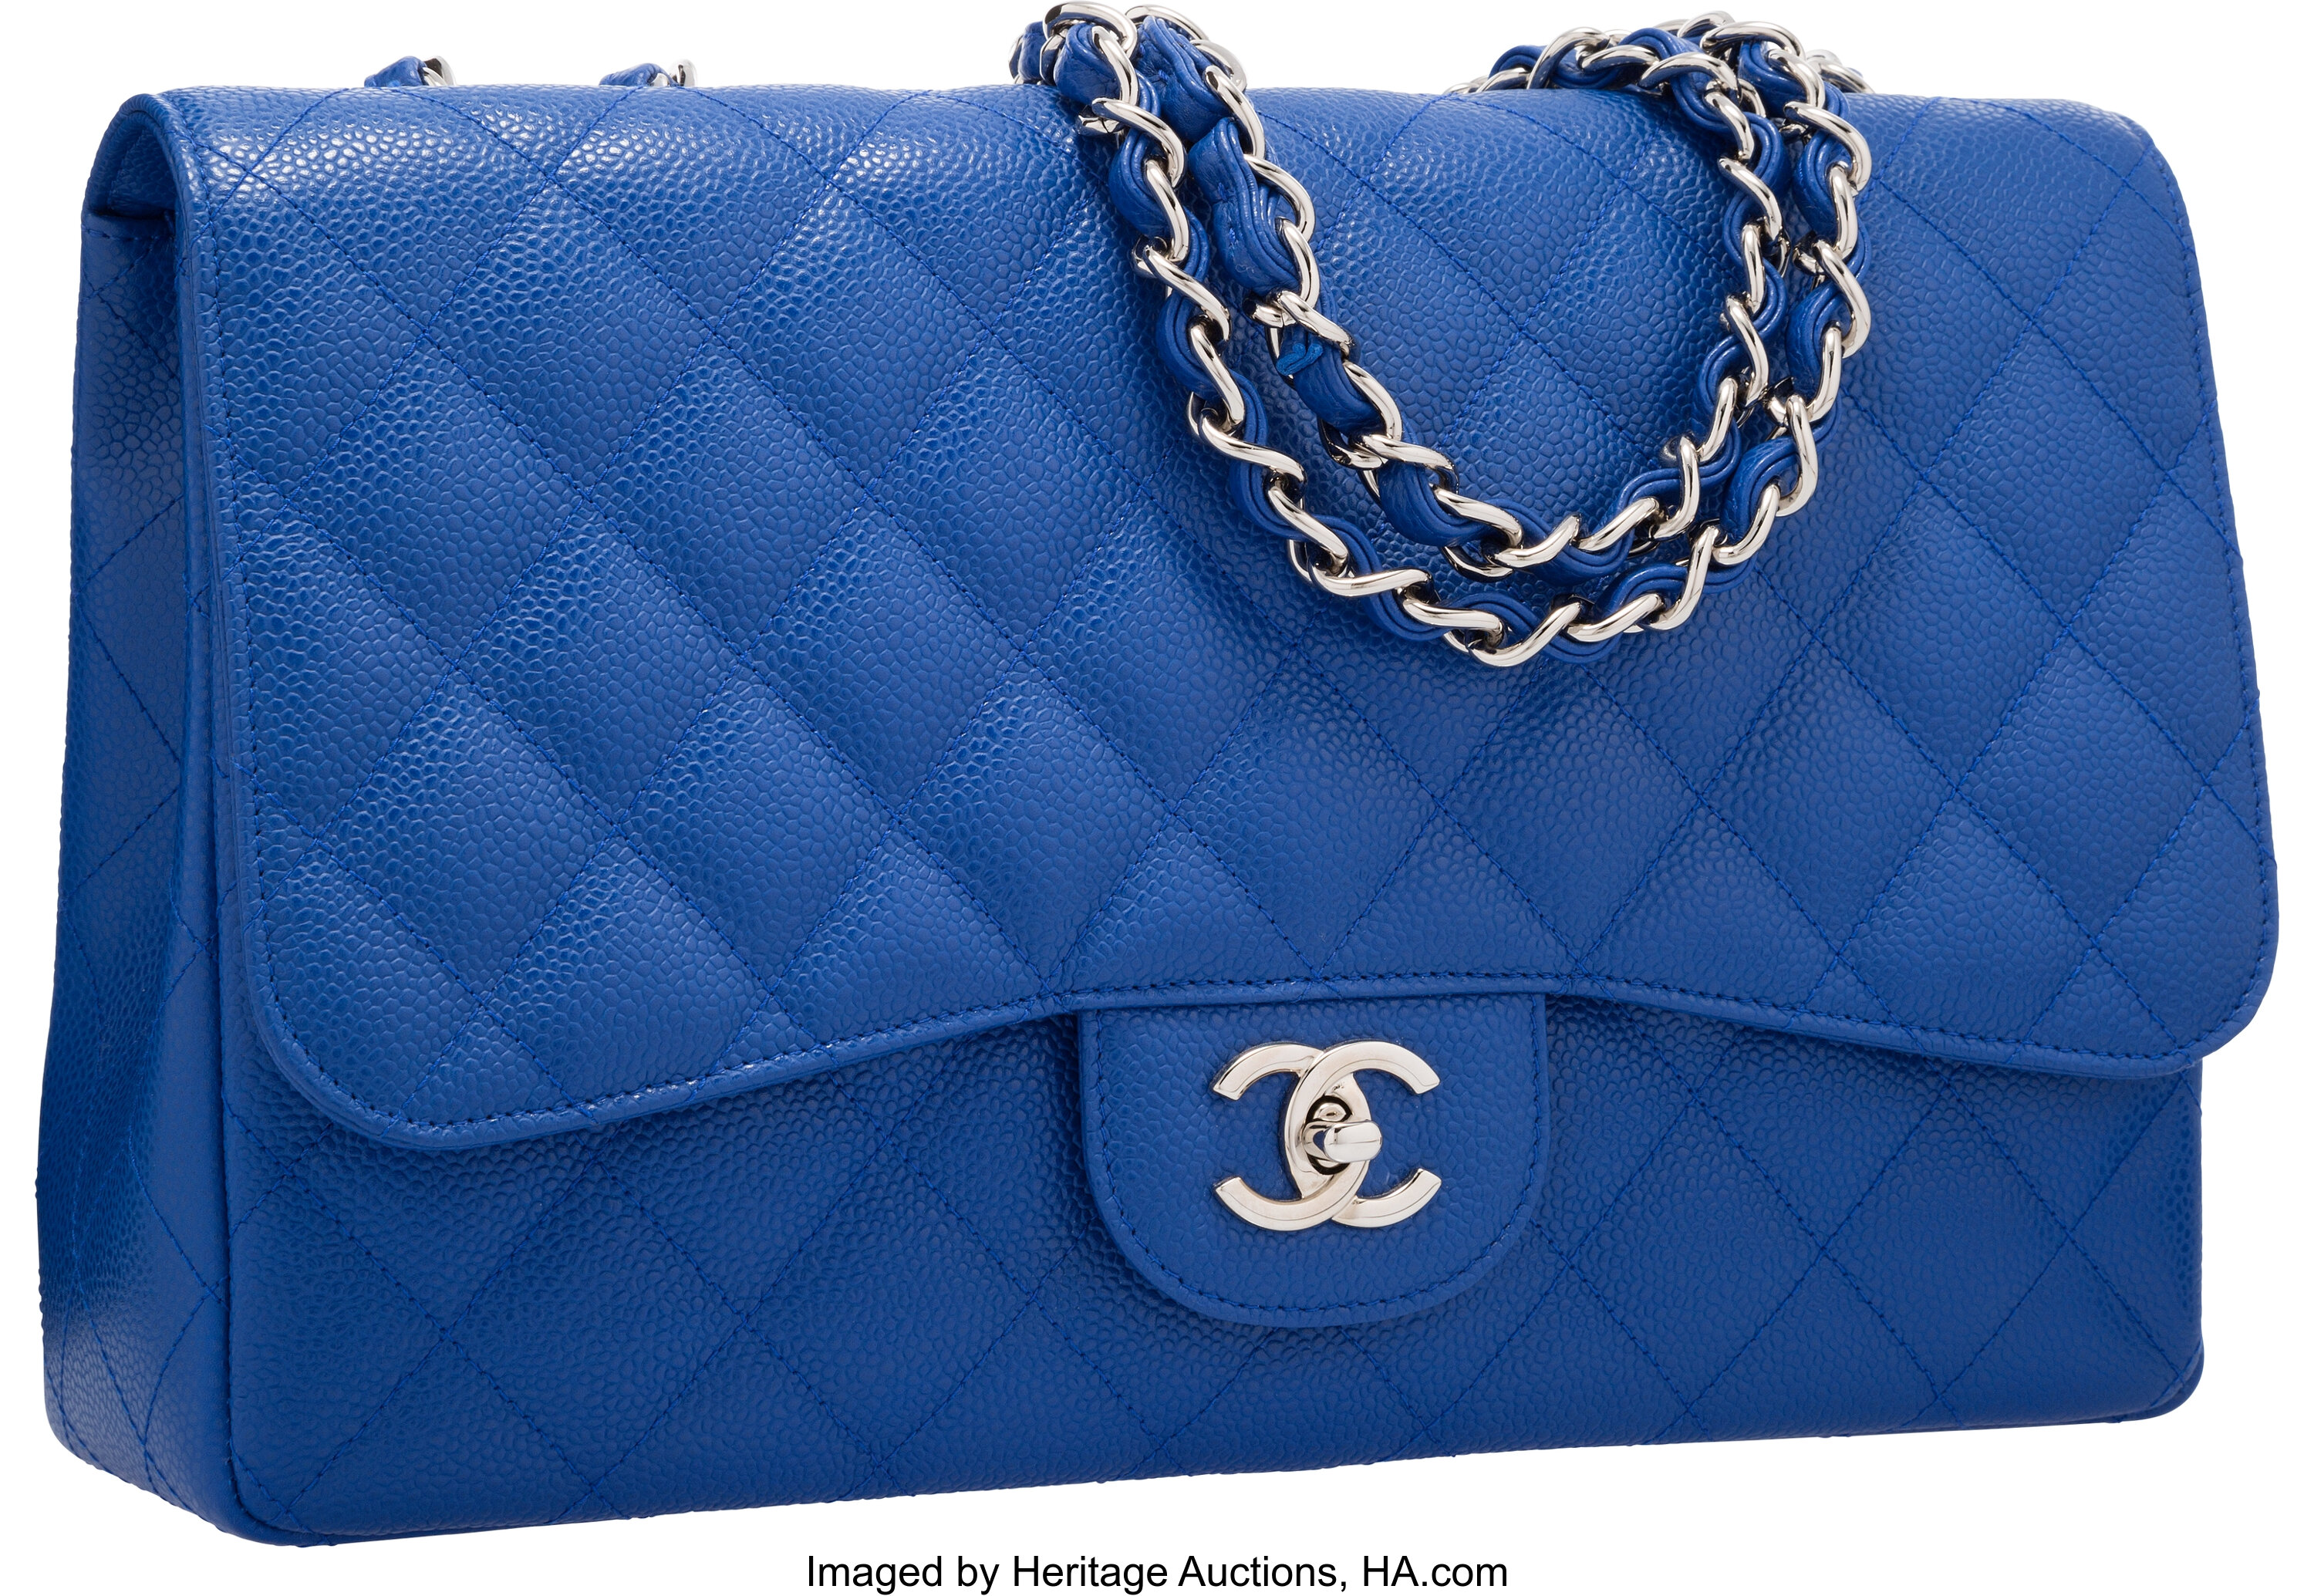 Chanel Blue Quilted Caviar Leather Large Easy Flap Bag Chanel